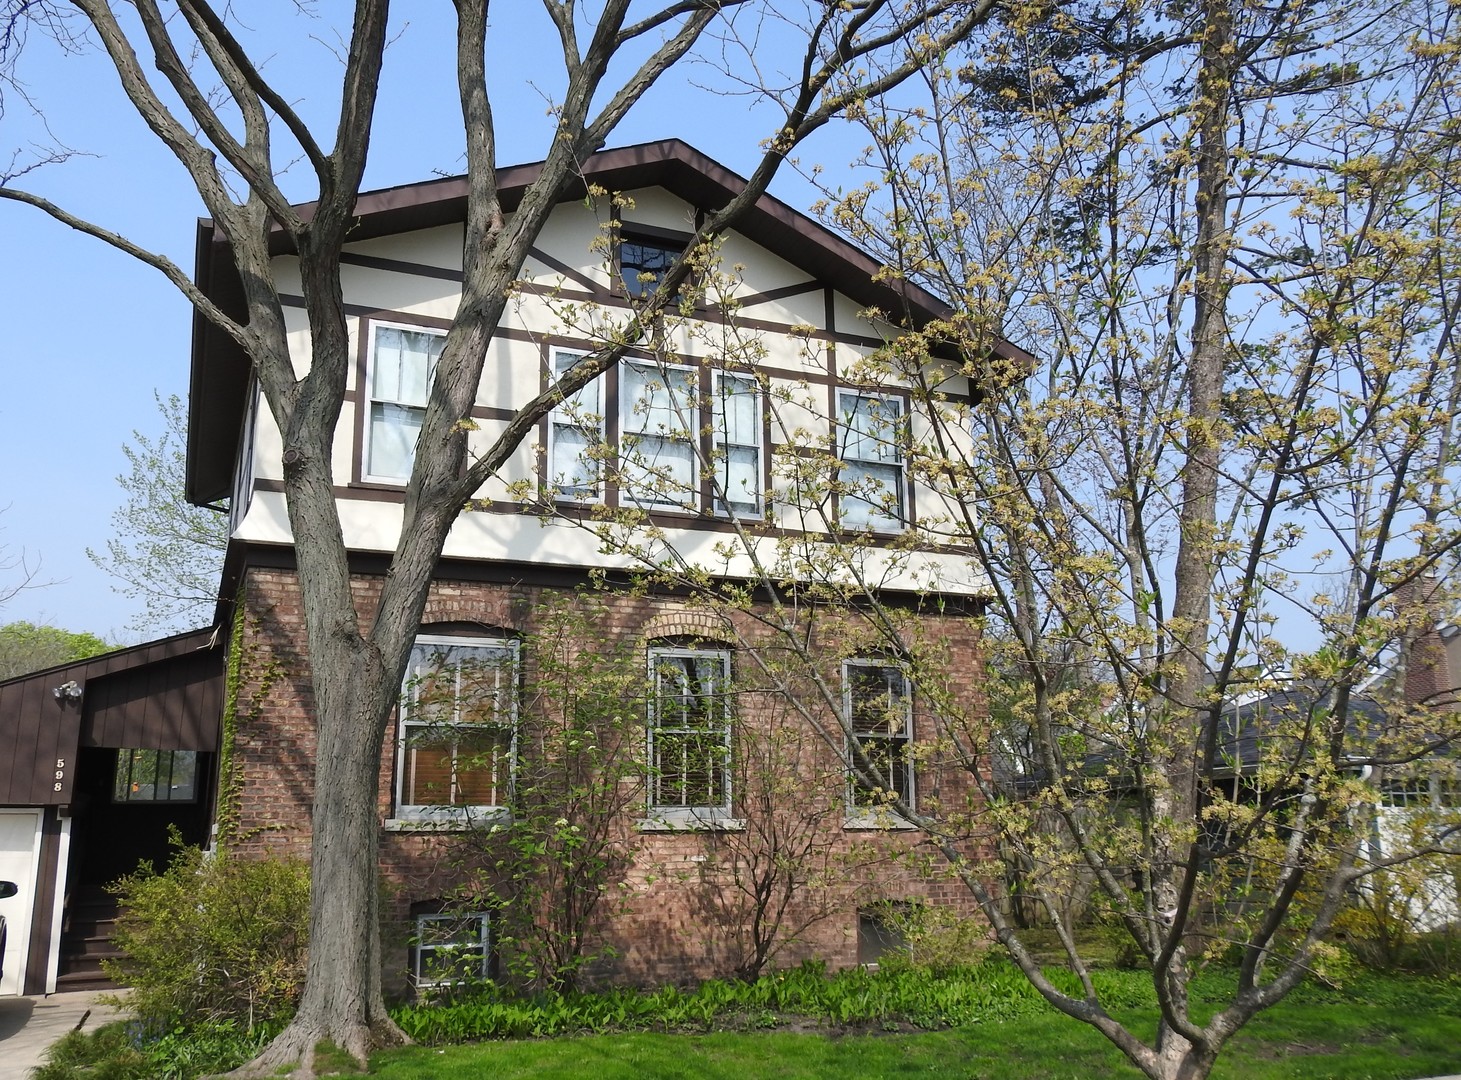 a view of a brick house with large windows and a yard